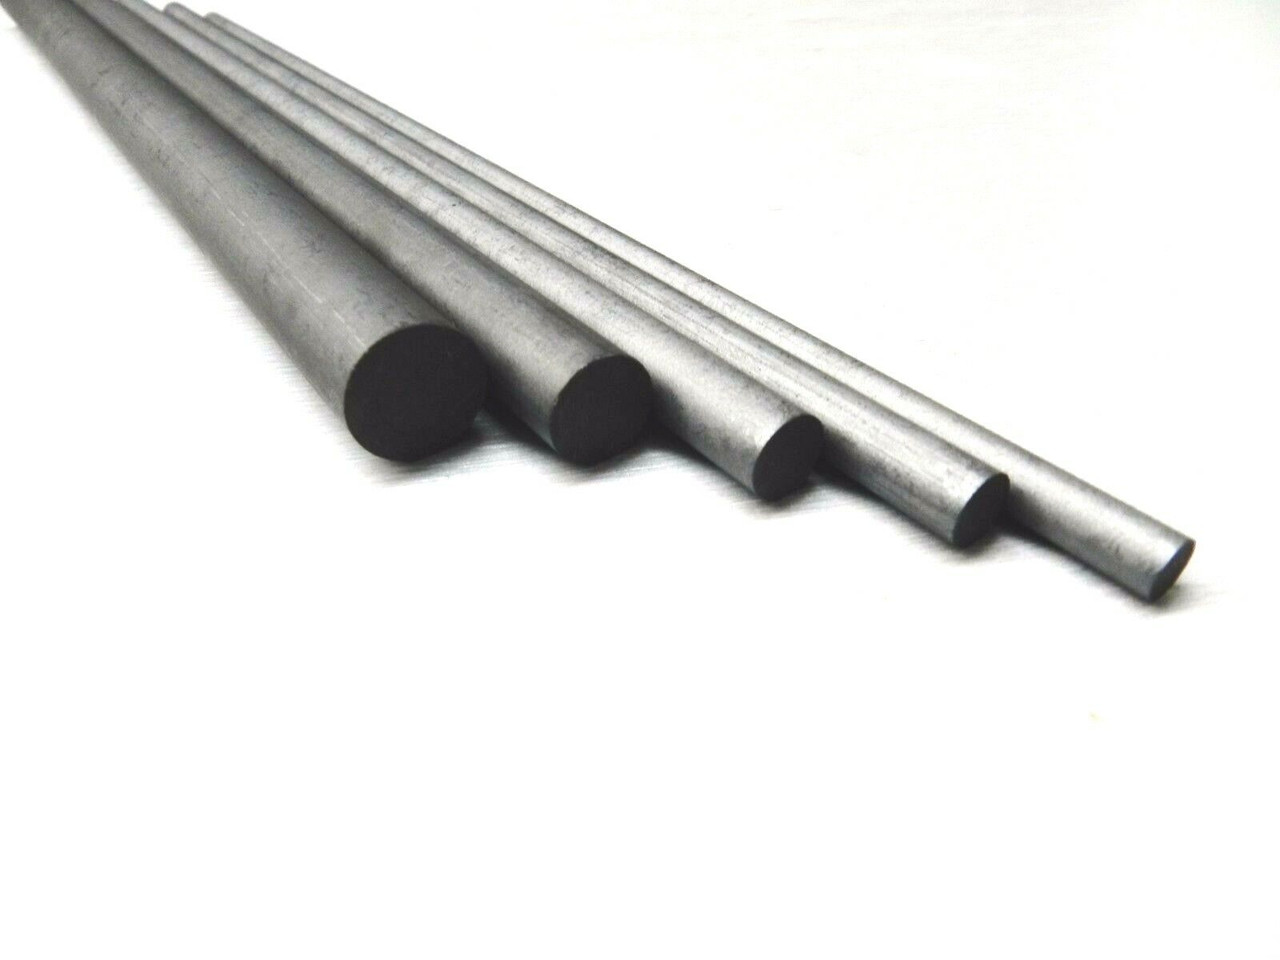 5 Carbon Graphite Stirring Rods Mixing Stir Melt Gold Silver Melting 1/4 - 5 /8" Made In USA